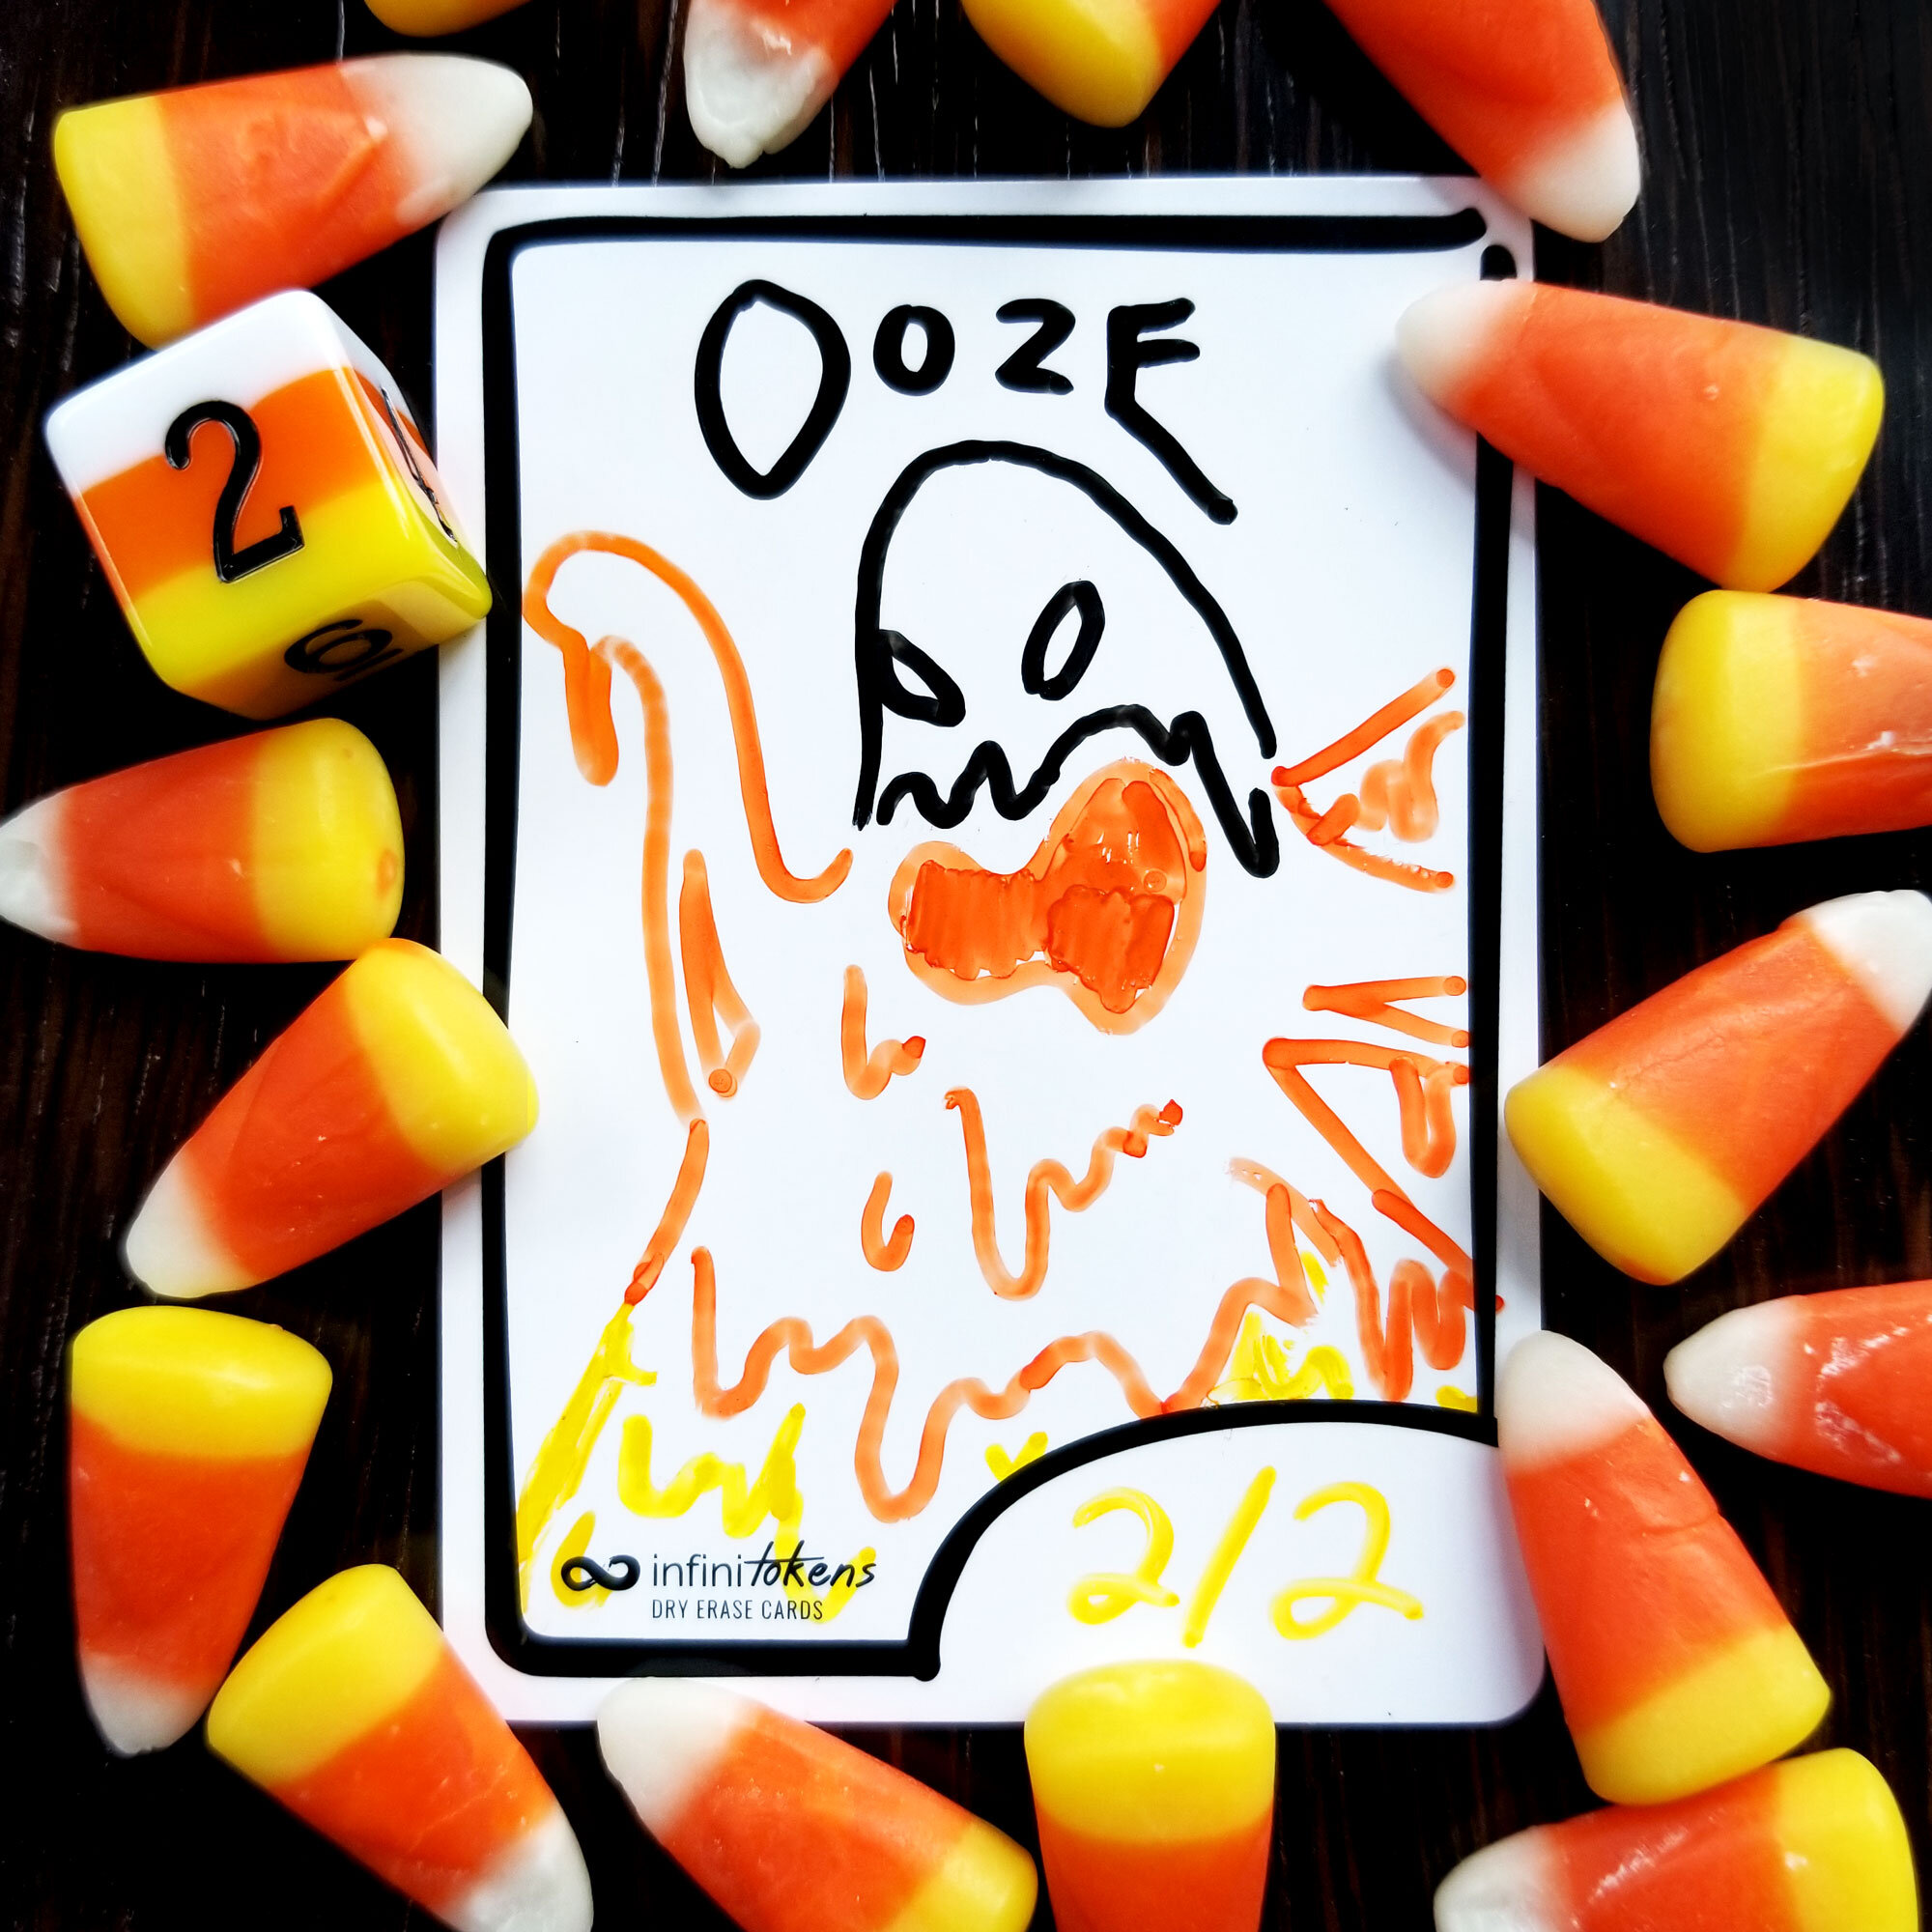 Day 20 - Ooze